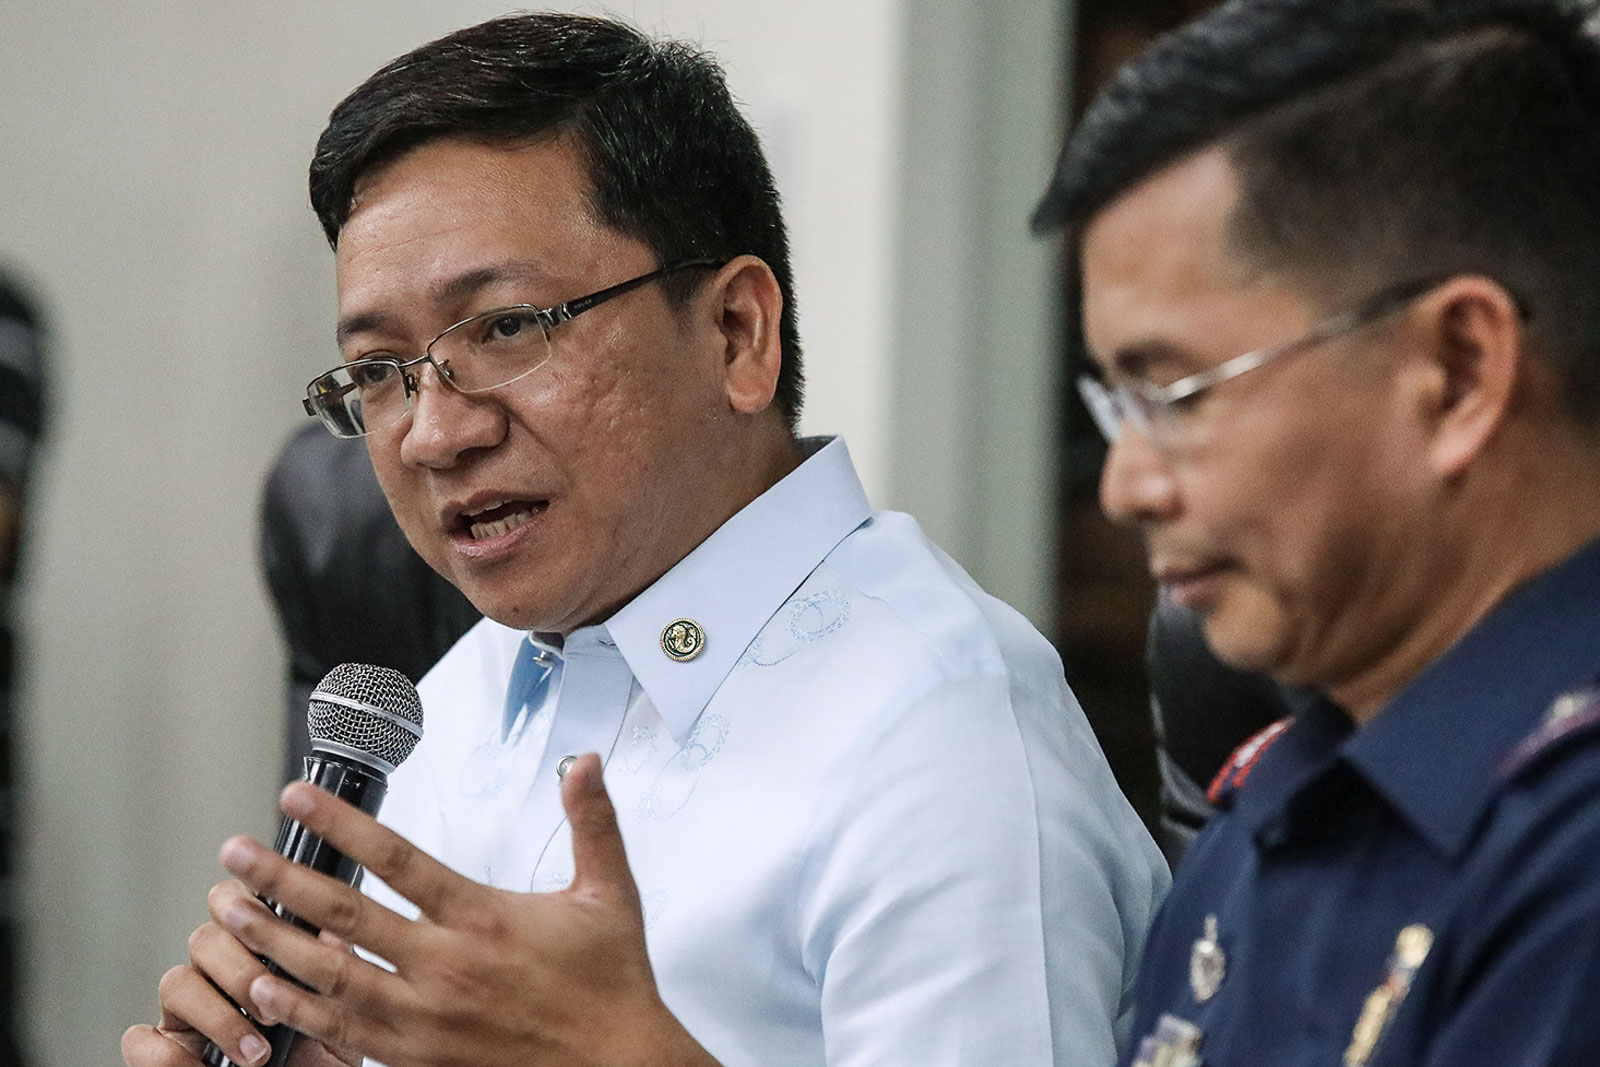 SUSPEND CLASSES. DILG Spokesperson Jonathan Malaya said that a memorandum circular has been issued urging mayors to suspend classes in areas with SEA Games 2019 venues. Photo by Darren Langit/Rappler 